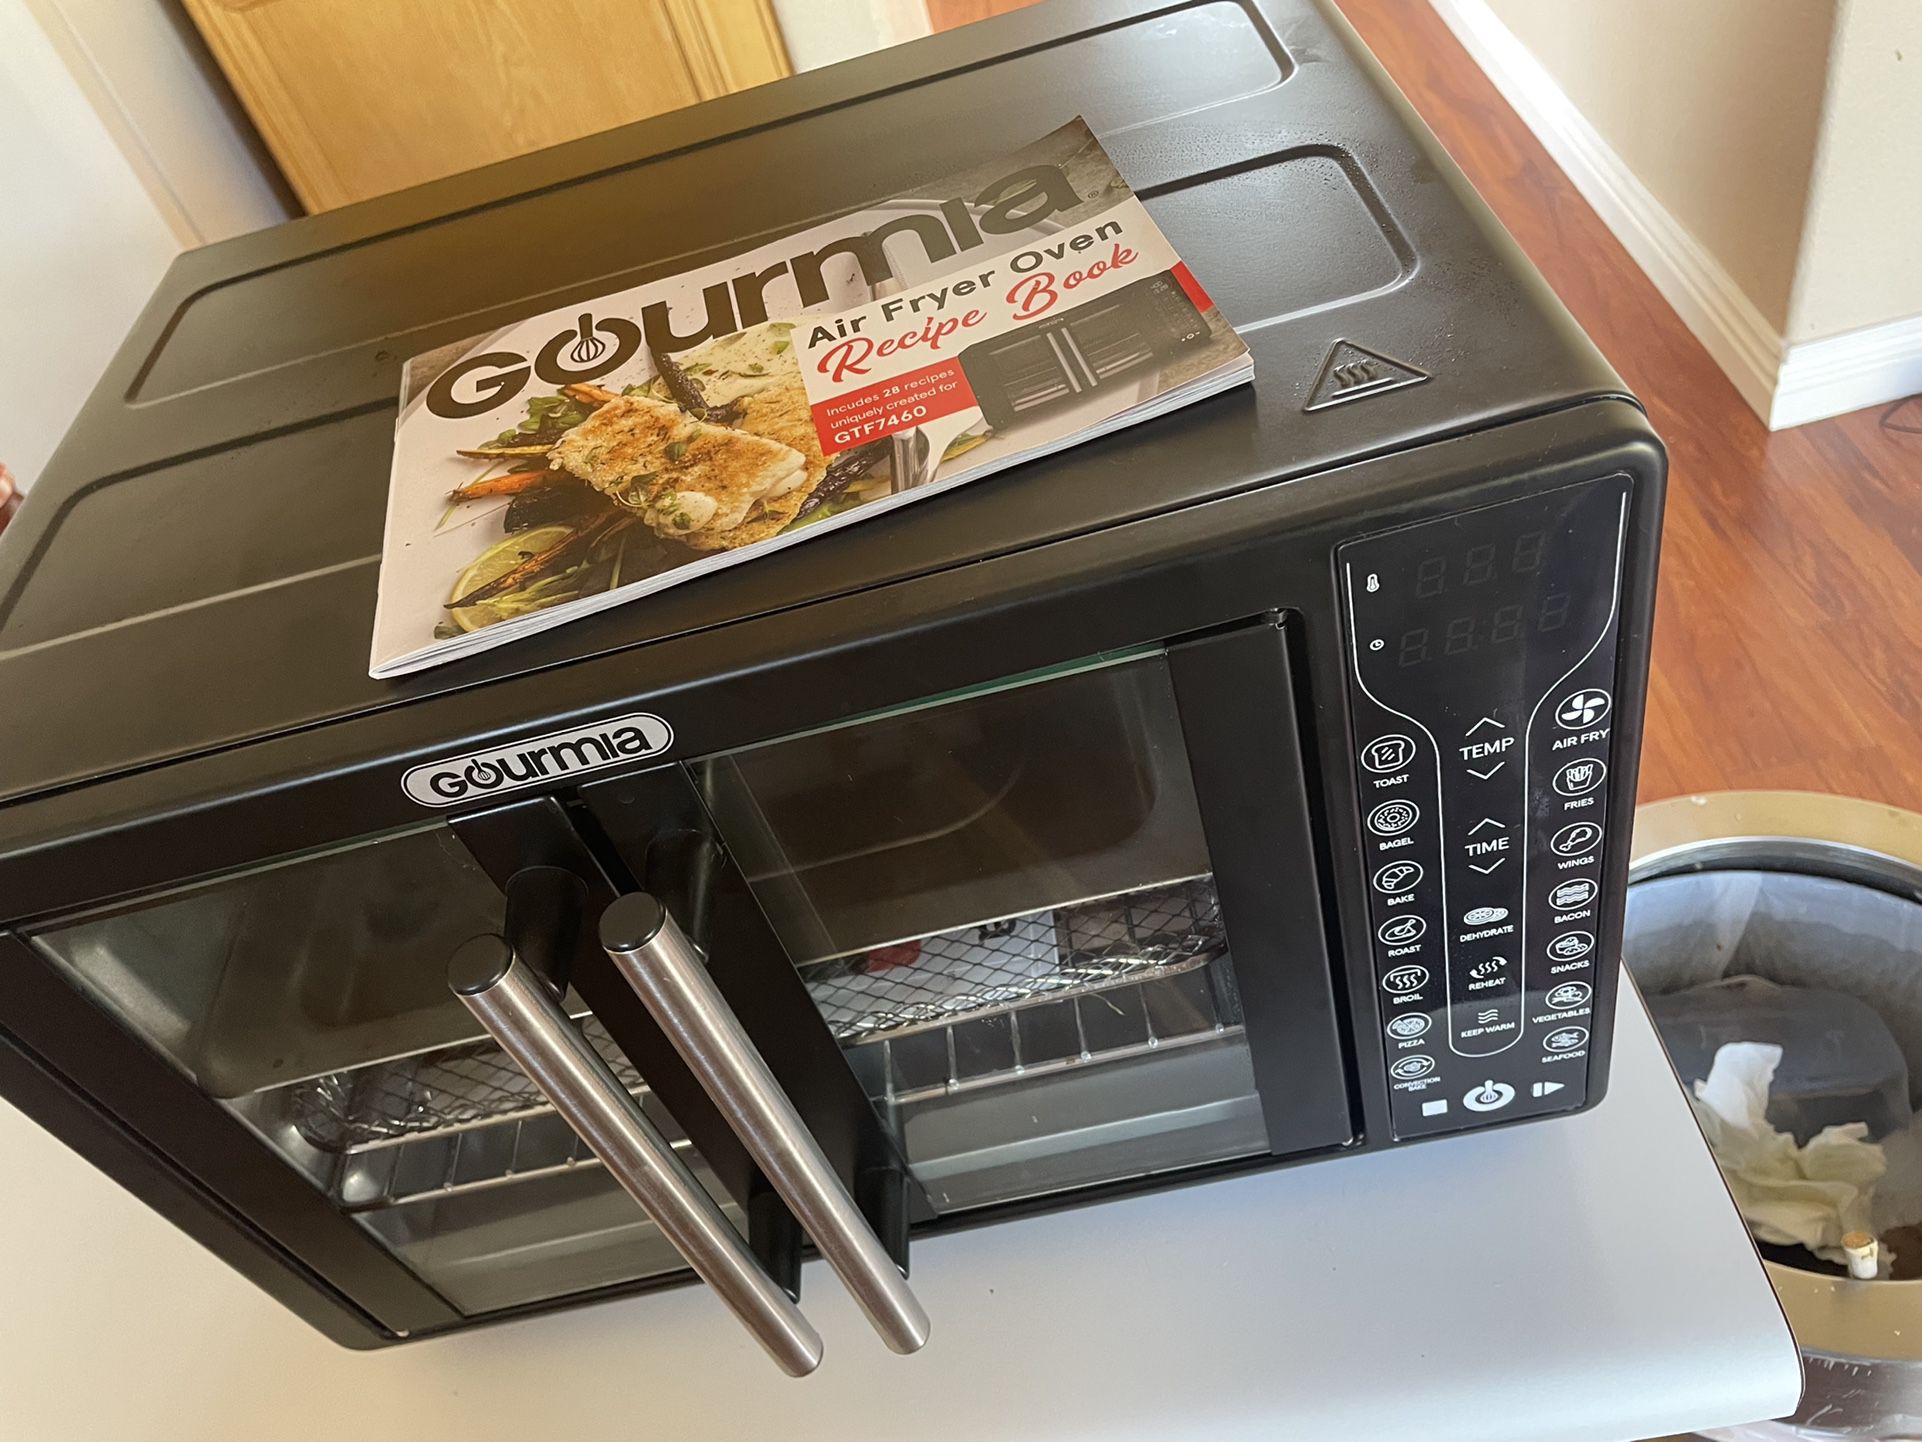 Galanz French Door Air Fryer Toaster Oven for Sale in Federal Way, WA -  OfferUp